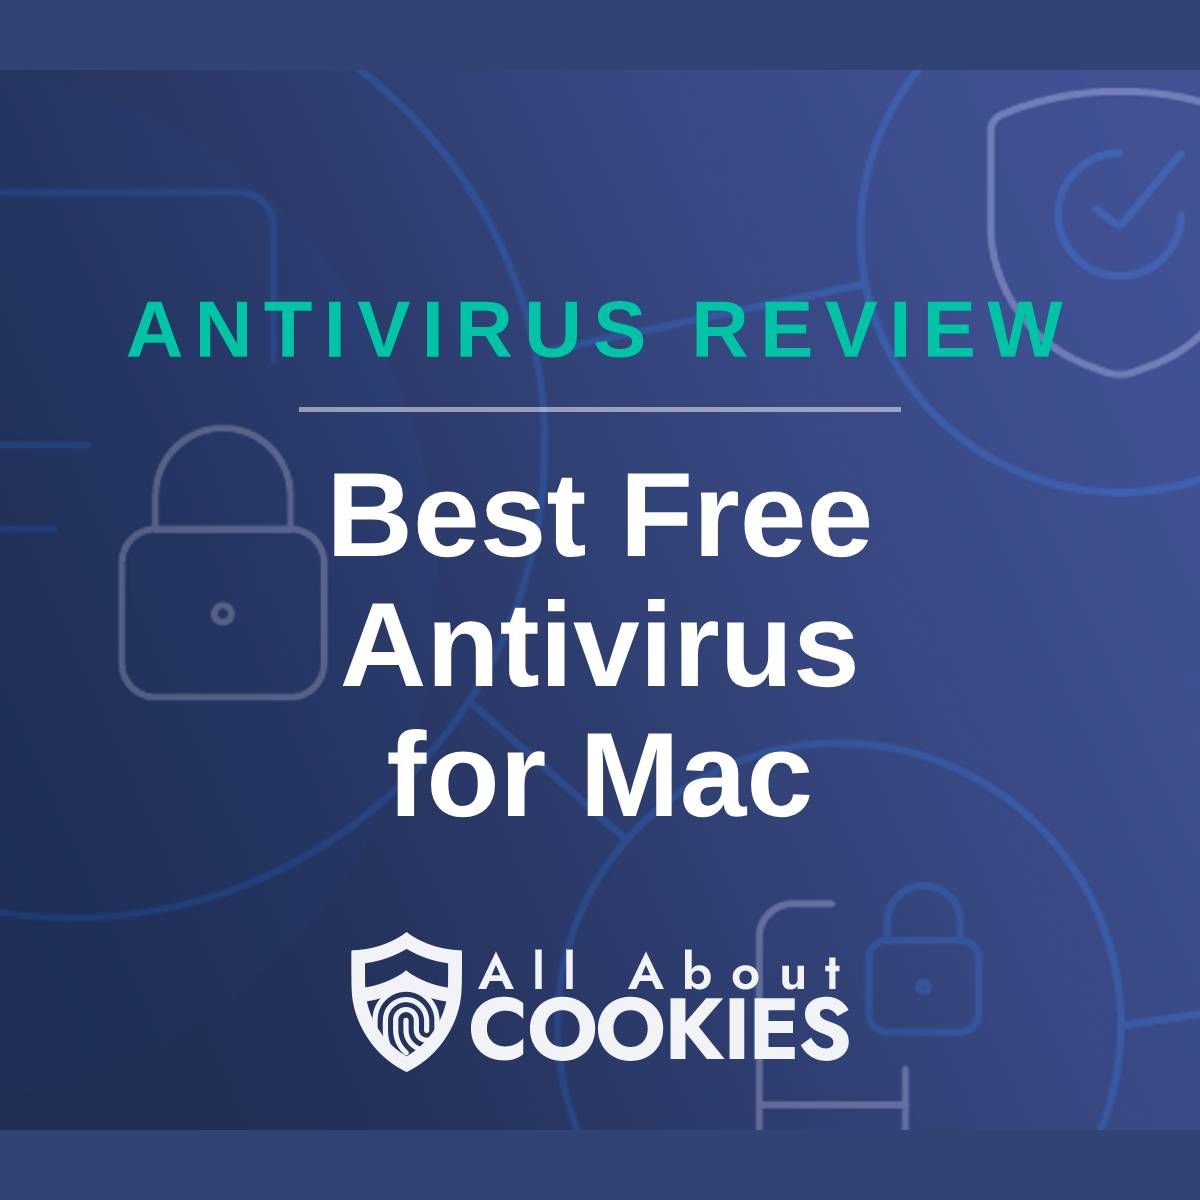 A blue background with images of locks and shields with the text &quot;Antivirus Review Best Free Antivirus for Mac&quot; and the All About Cookies logo. 